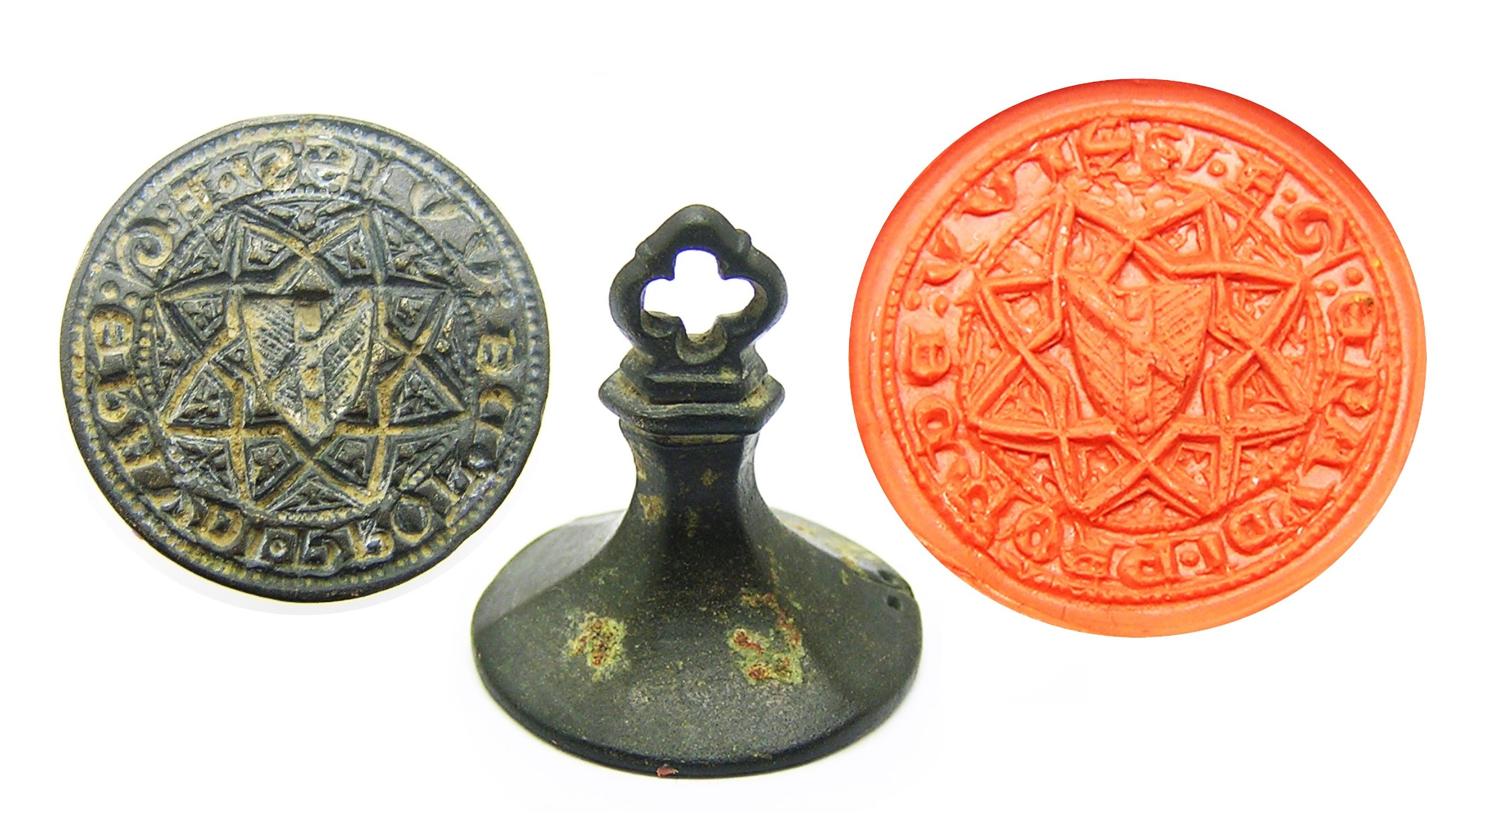 Exceptional Medieval Armorial Seal Matrice